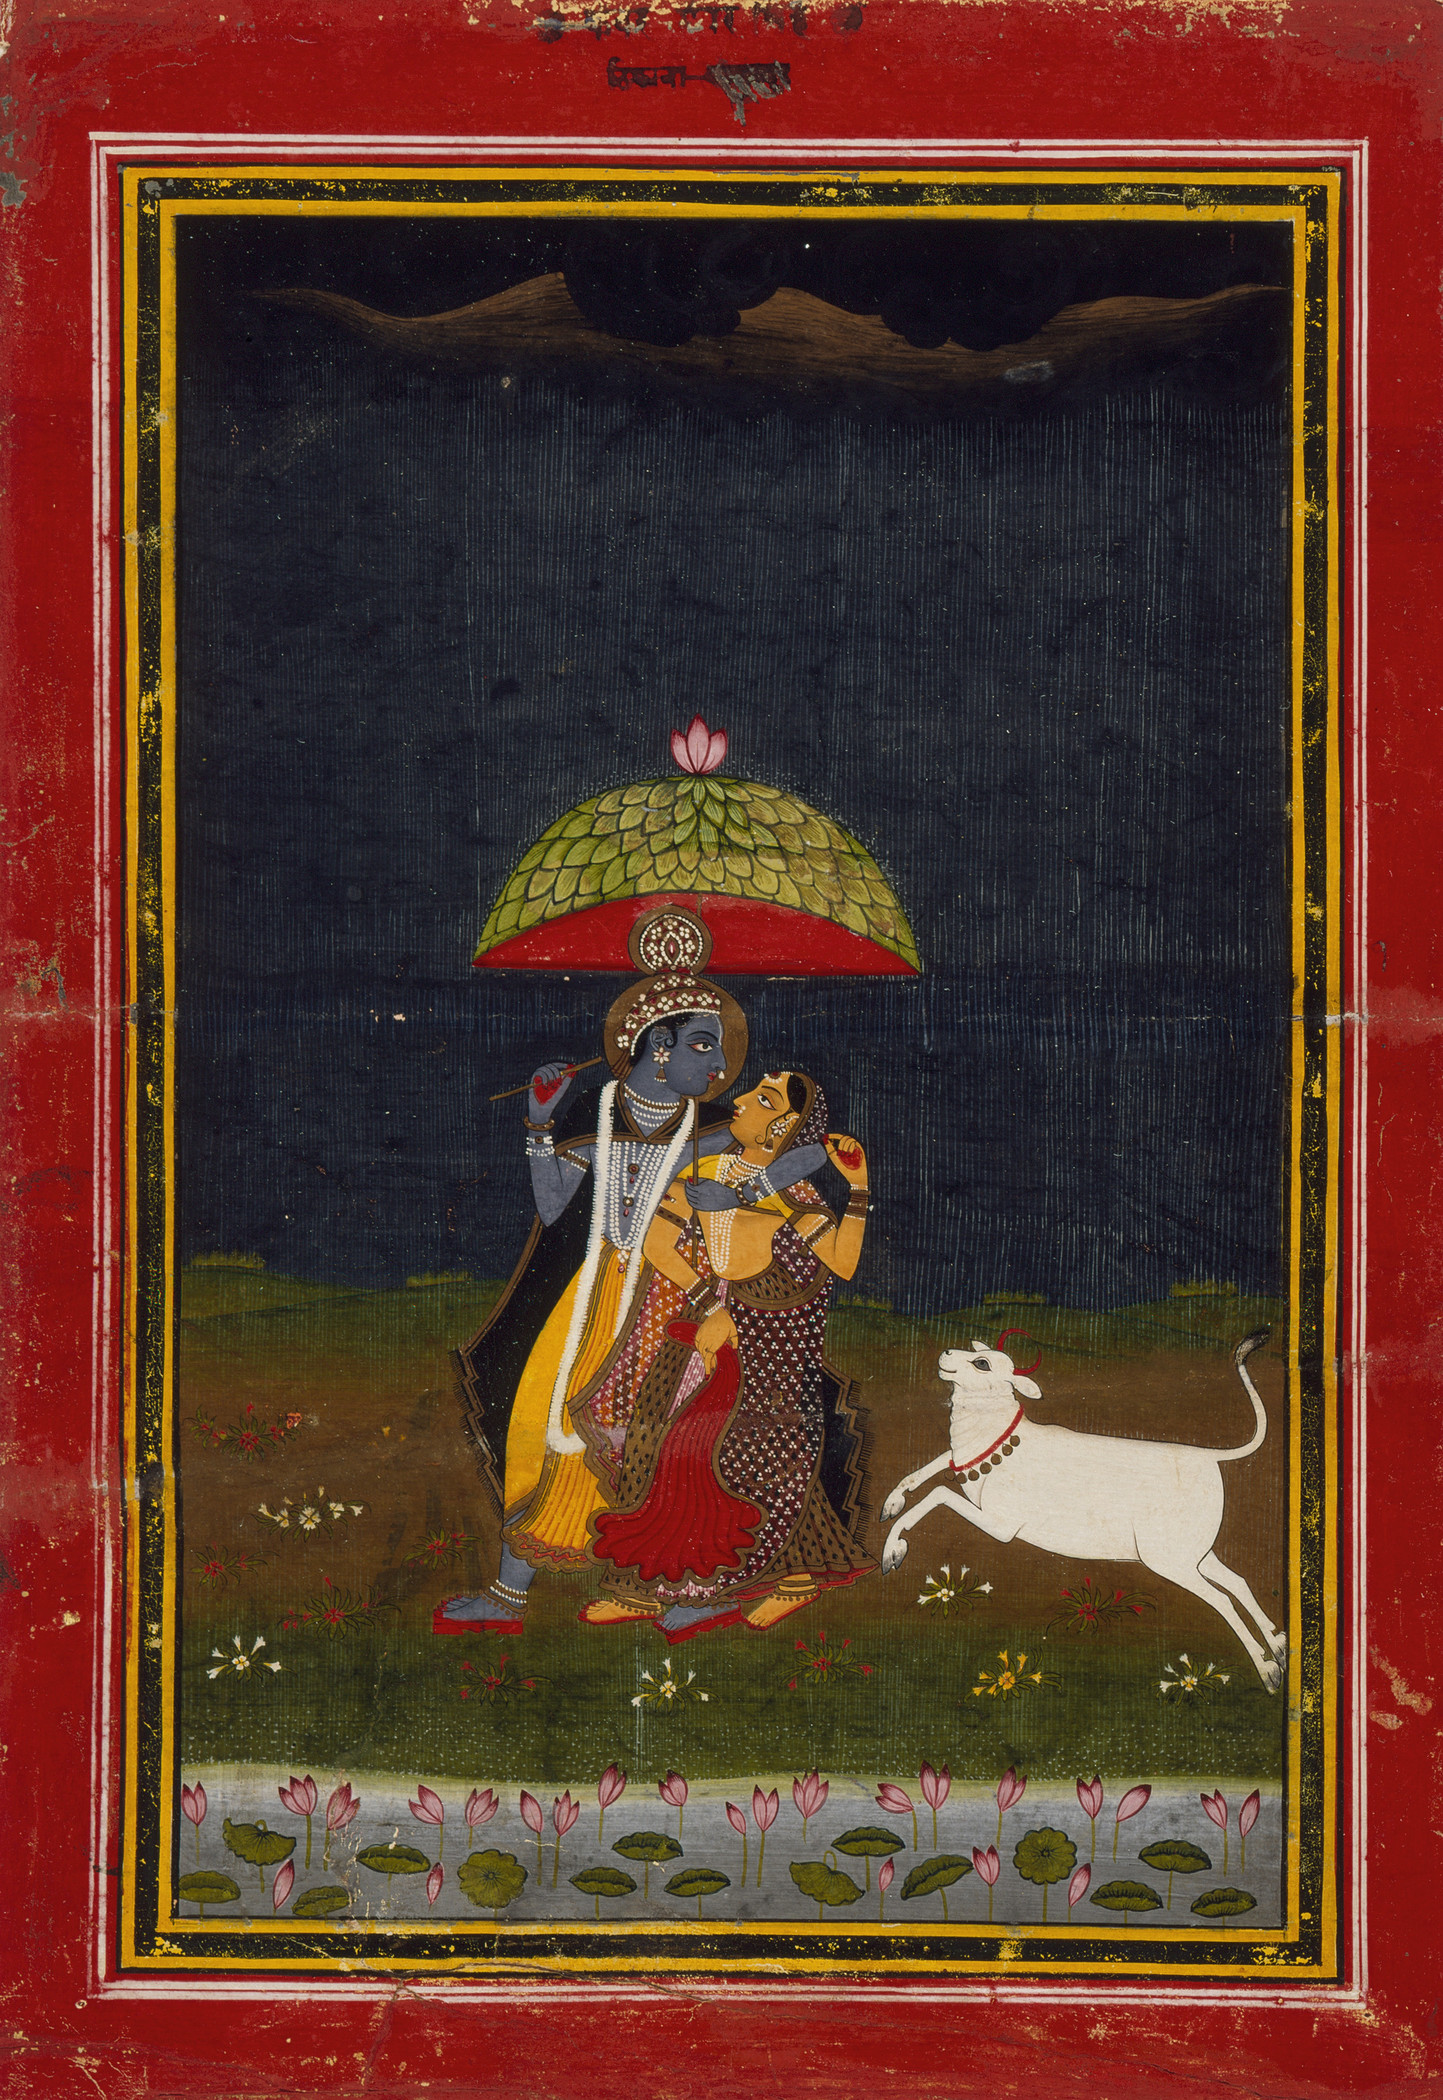 Krishna and Radha Strolling in the Rain by Unknown Artist - c. 1775 - 22.54 x 14.6 cm LACMA, Los Angeles County Museum of Art